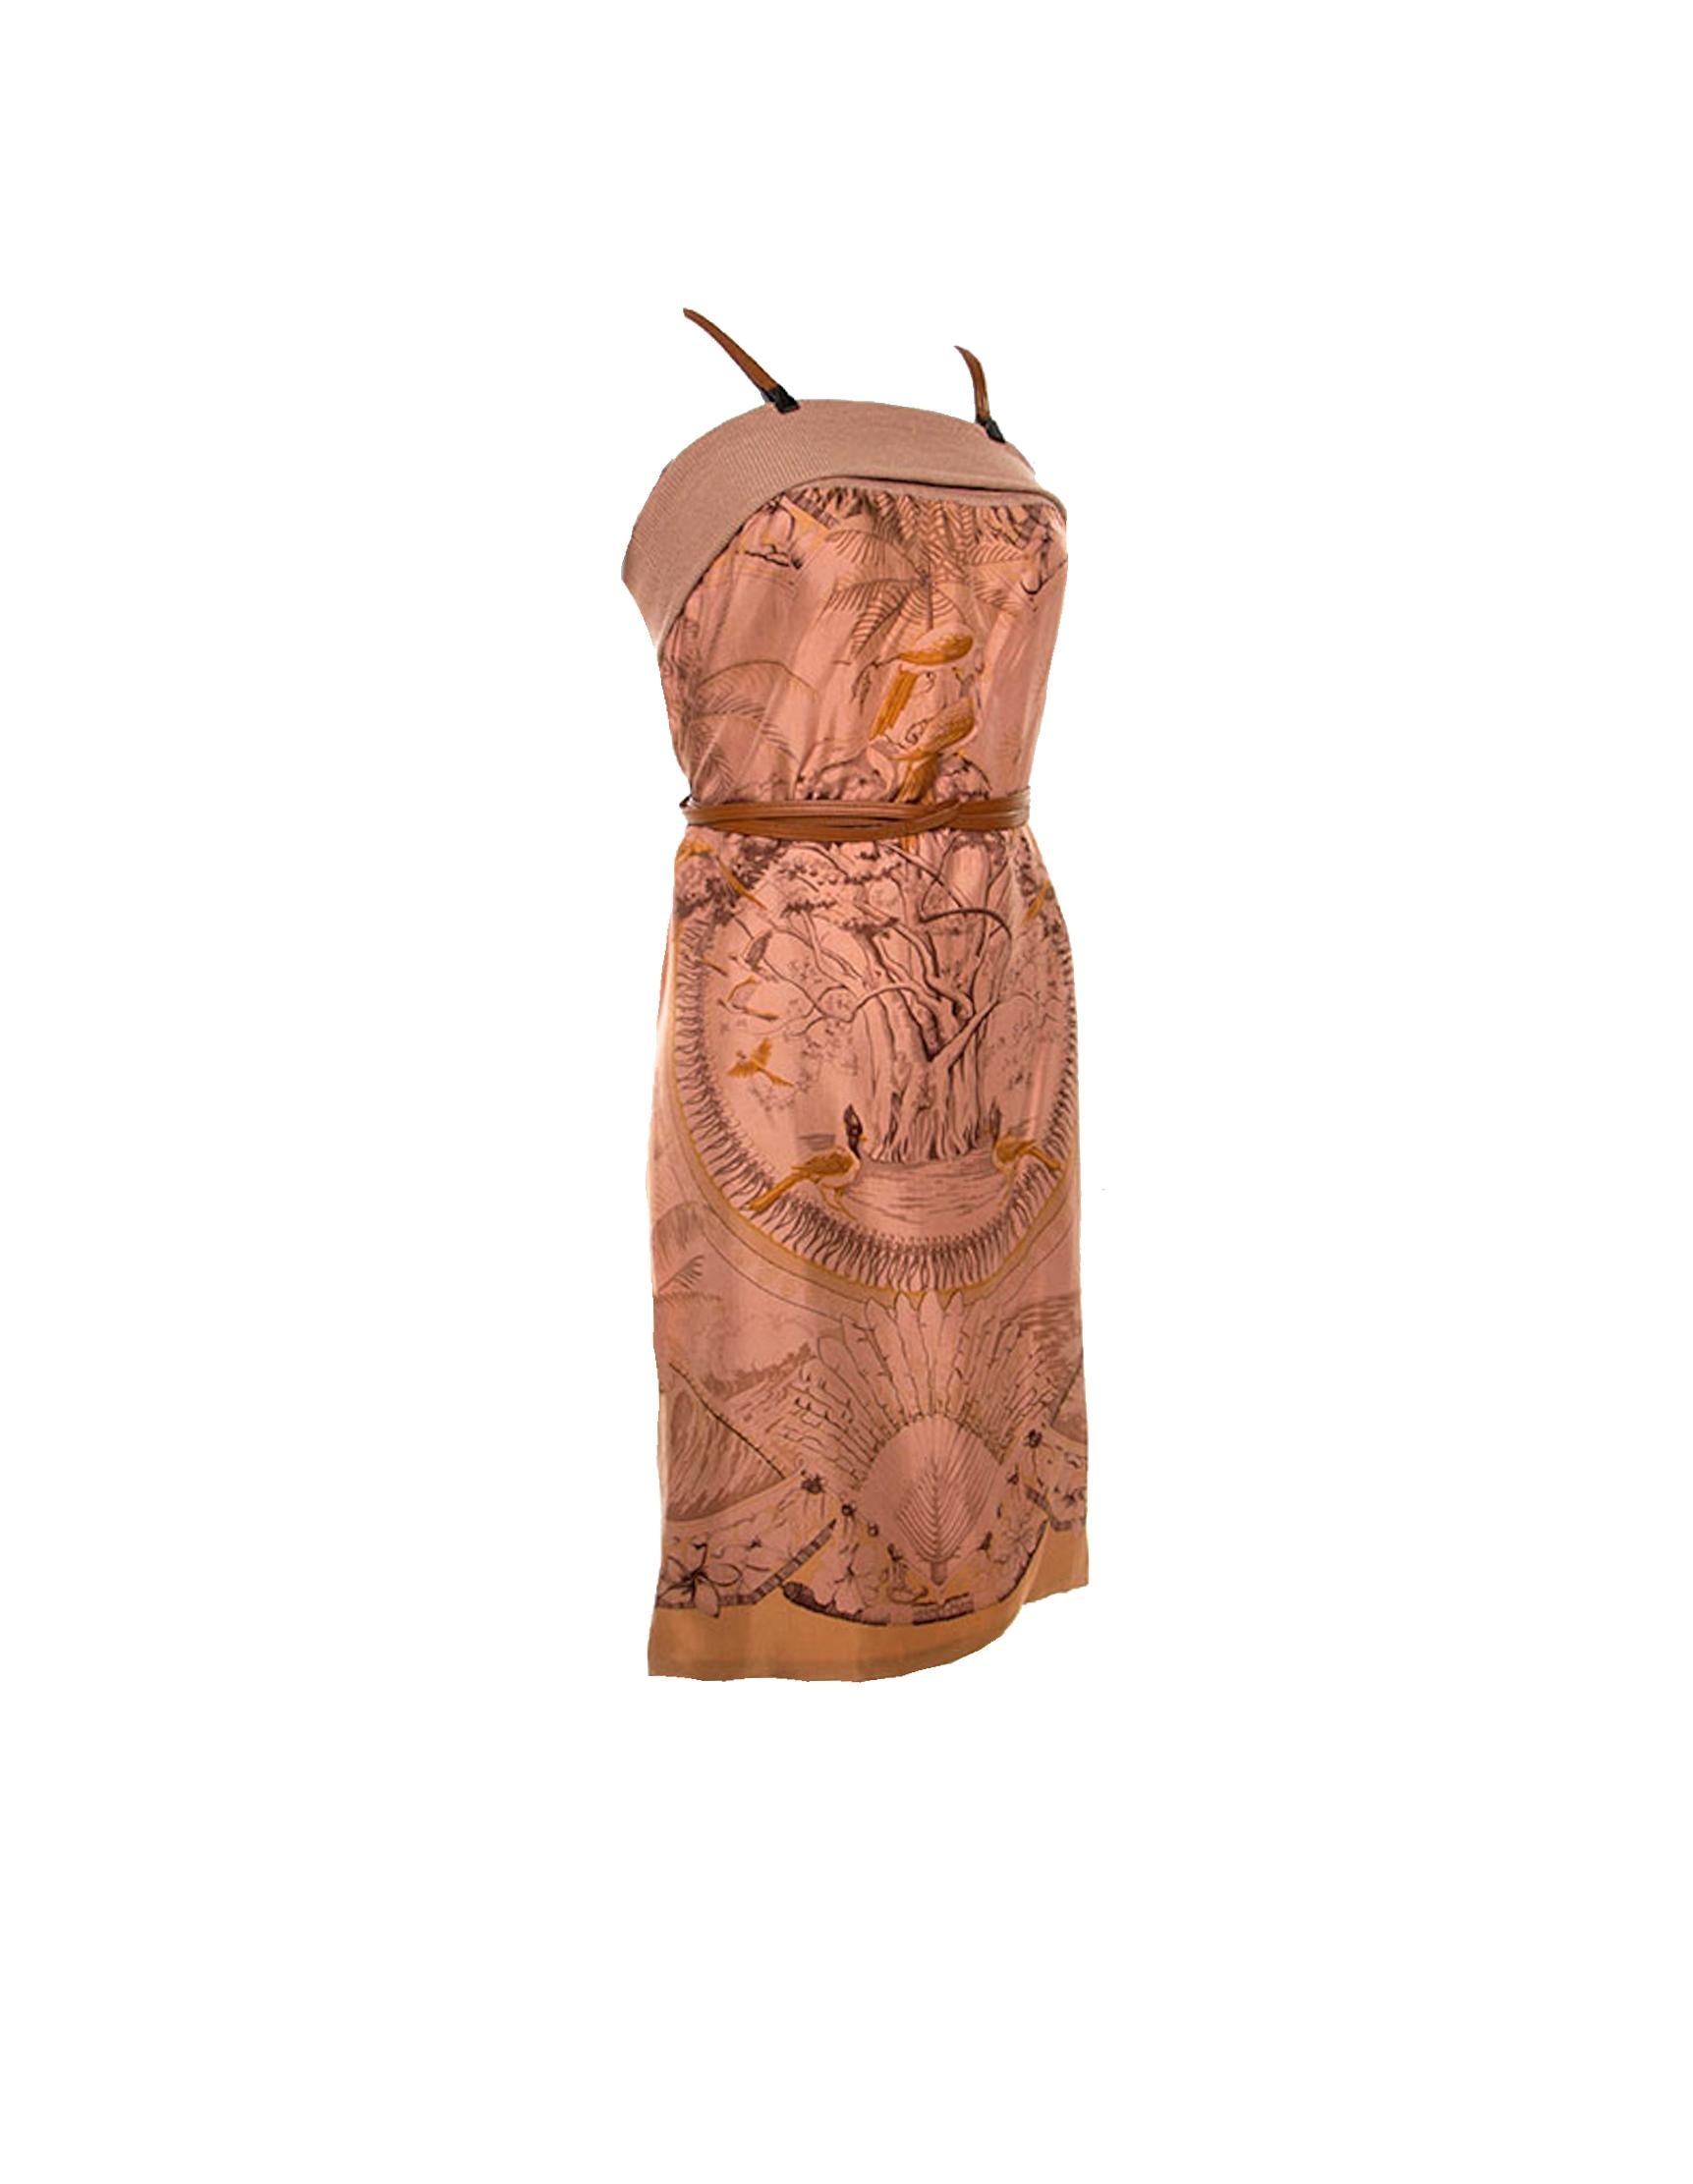 THE MOST LUXURIOUS CLOTHING ON EARTH!
Classy, timeless HERMES print silk dress
 Signature piece with the timeless HERMES print
 Crafted from silk and linen, a two piece tan leather strap belt enhances the style
So versatile!
The dress can be also